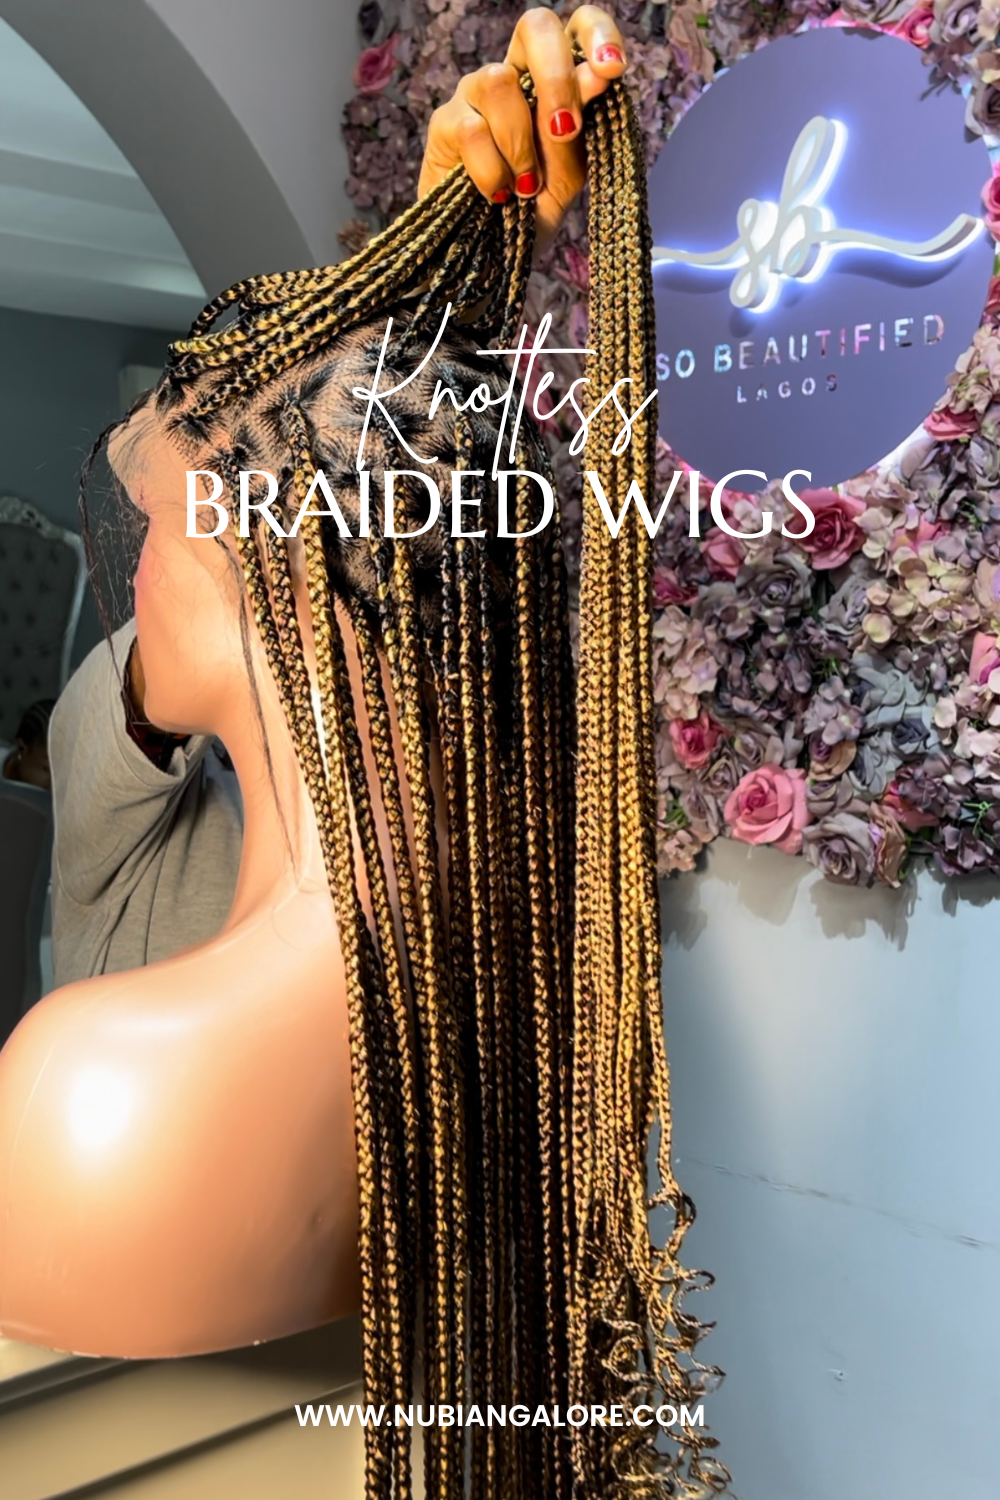 The Beauty of Braided Wigs